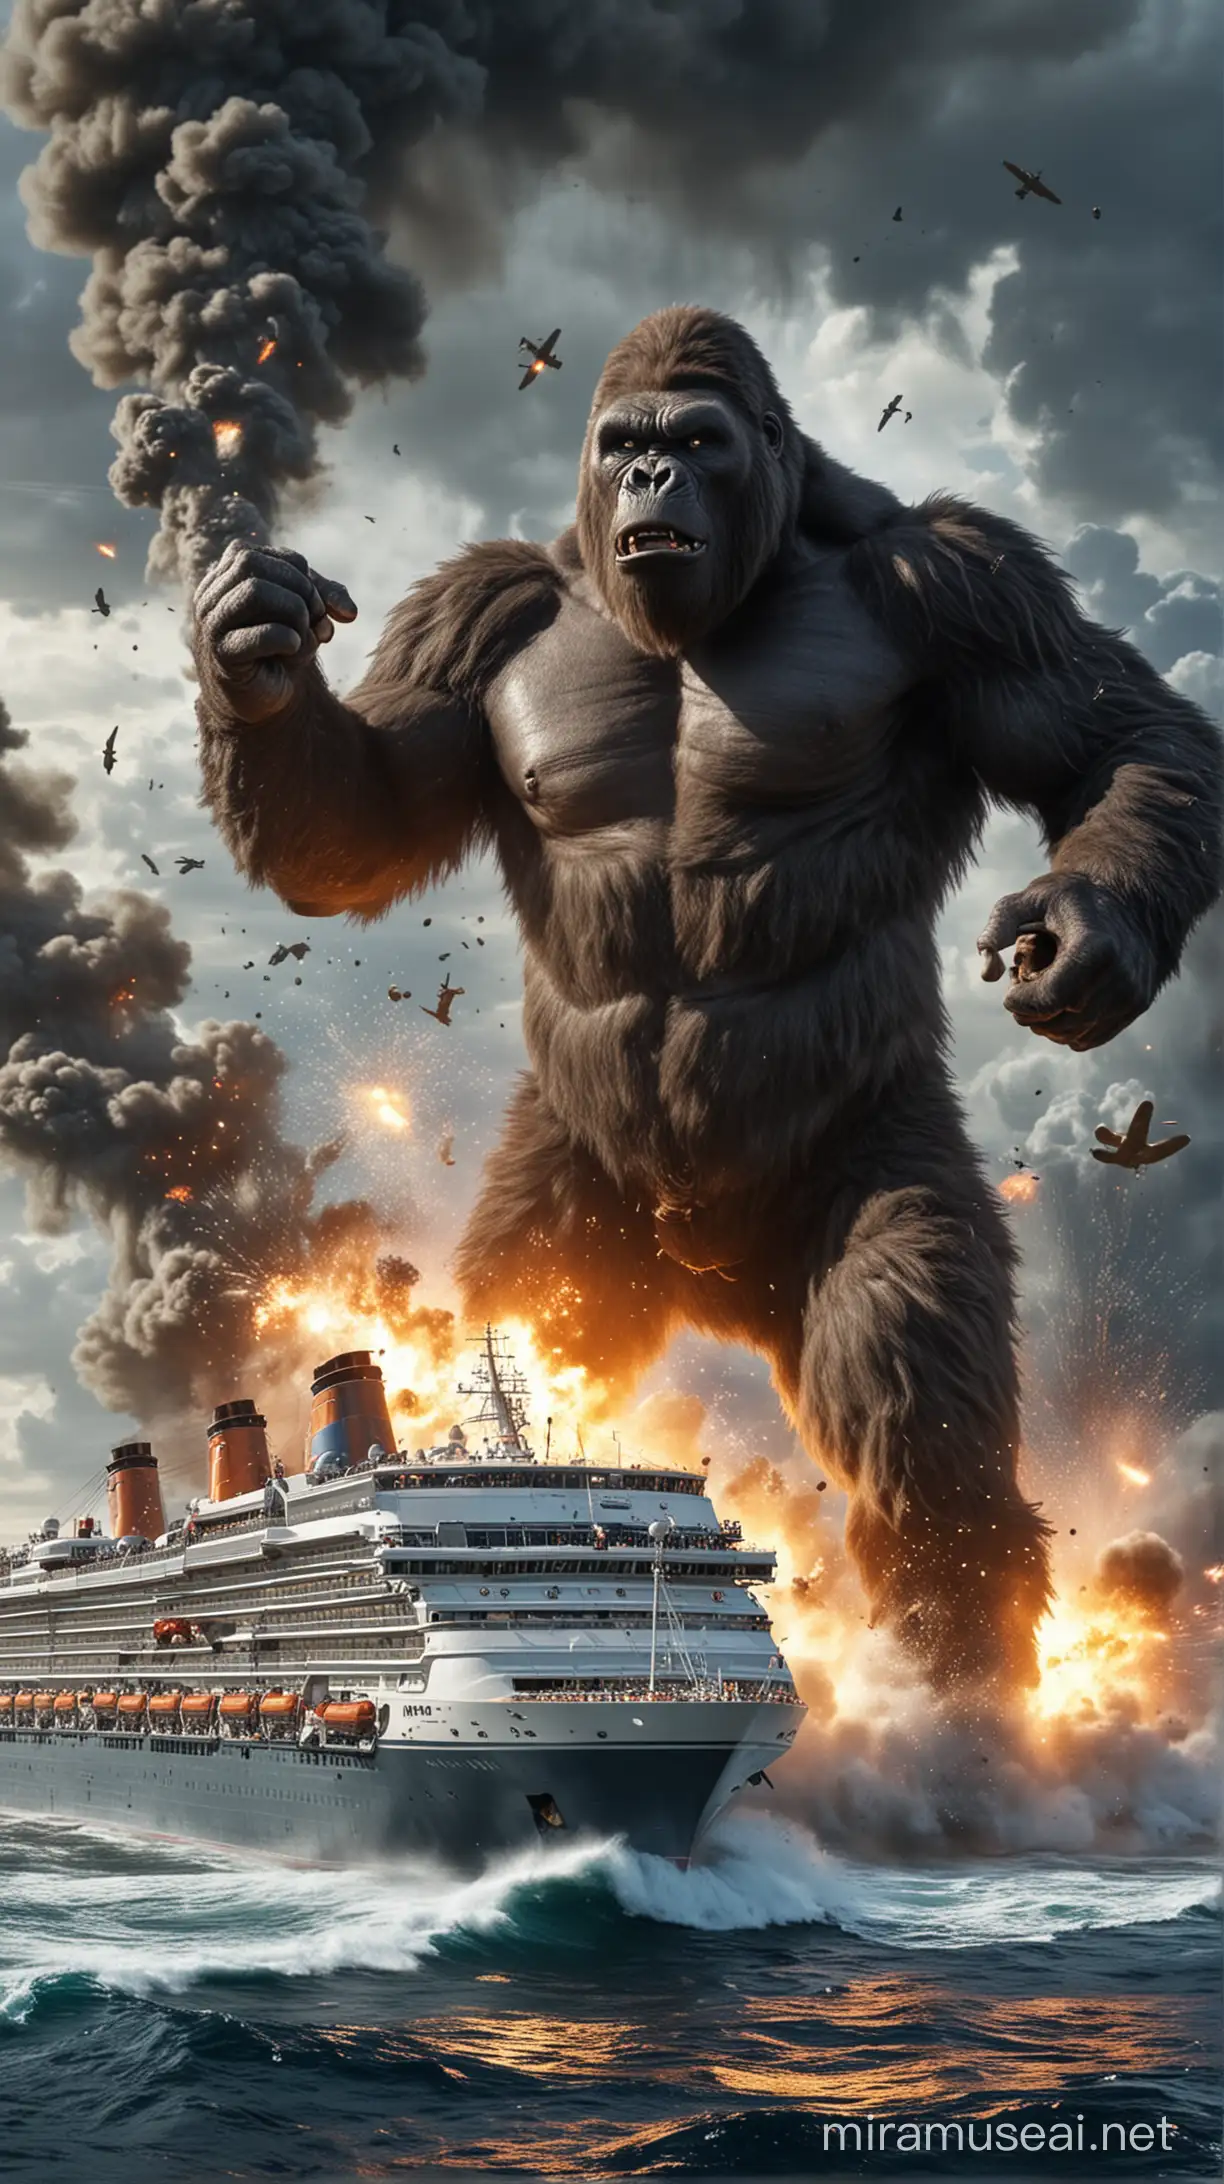 Giant Ape Rampages on Cruise Ship Amid Explosions